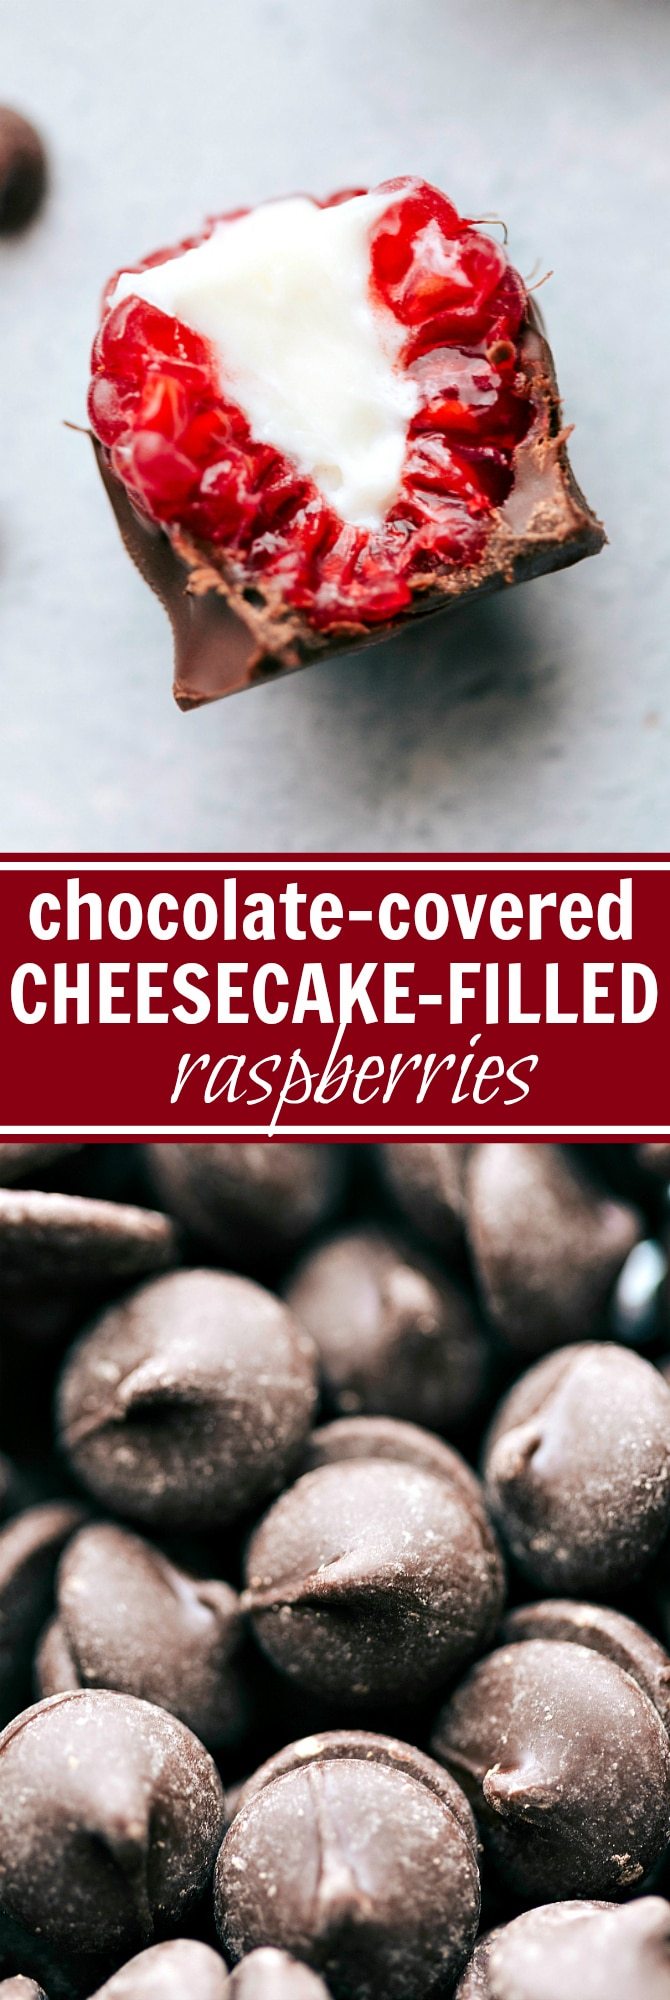 CHEESECAKE FILLED RASPBERRiES! Only FOUR ingredients to make these amazing chocolate-dipped and cheesecake-filled raspberries. via chelseasmessyapron.com